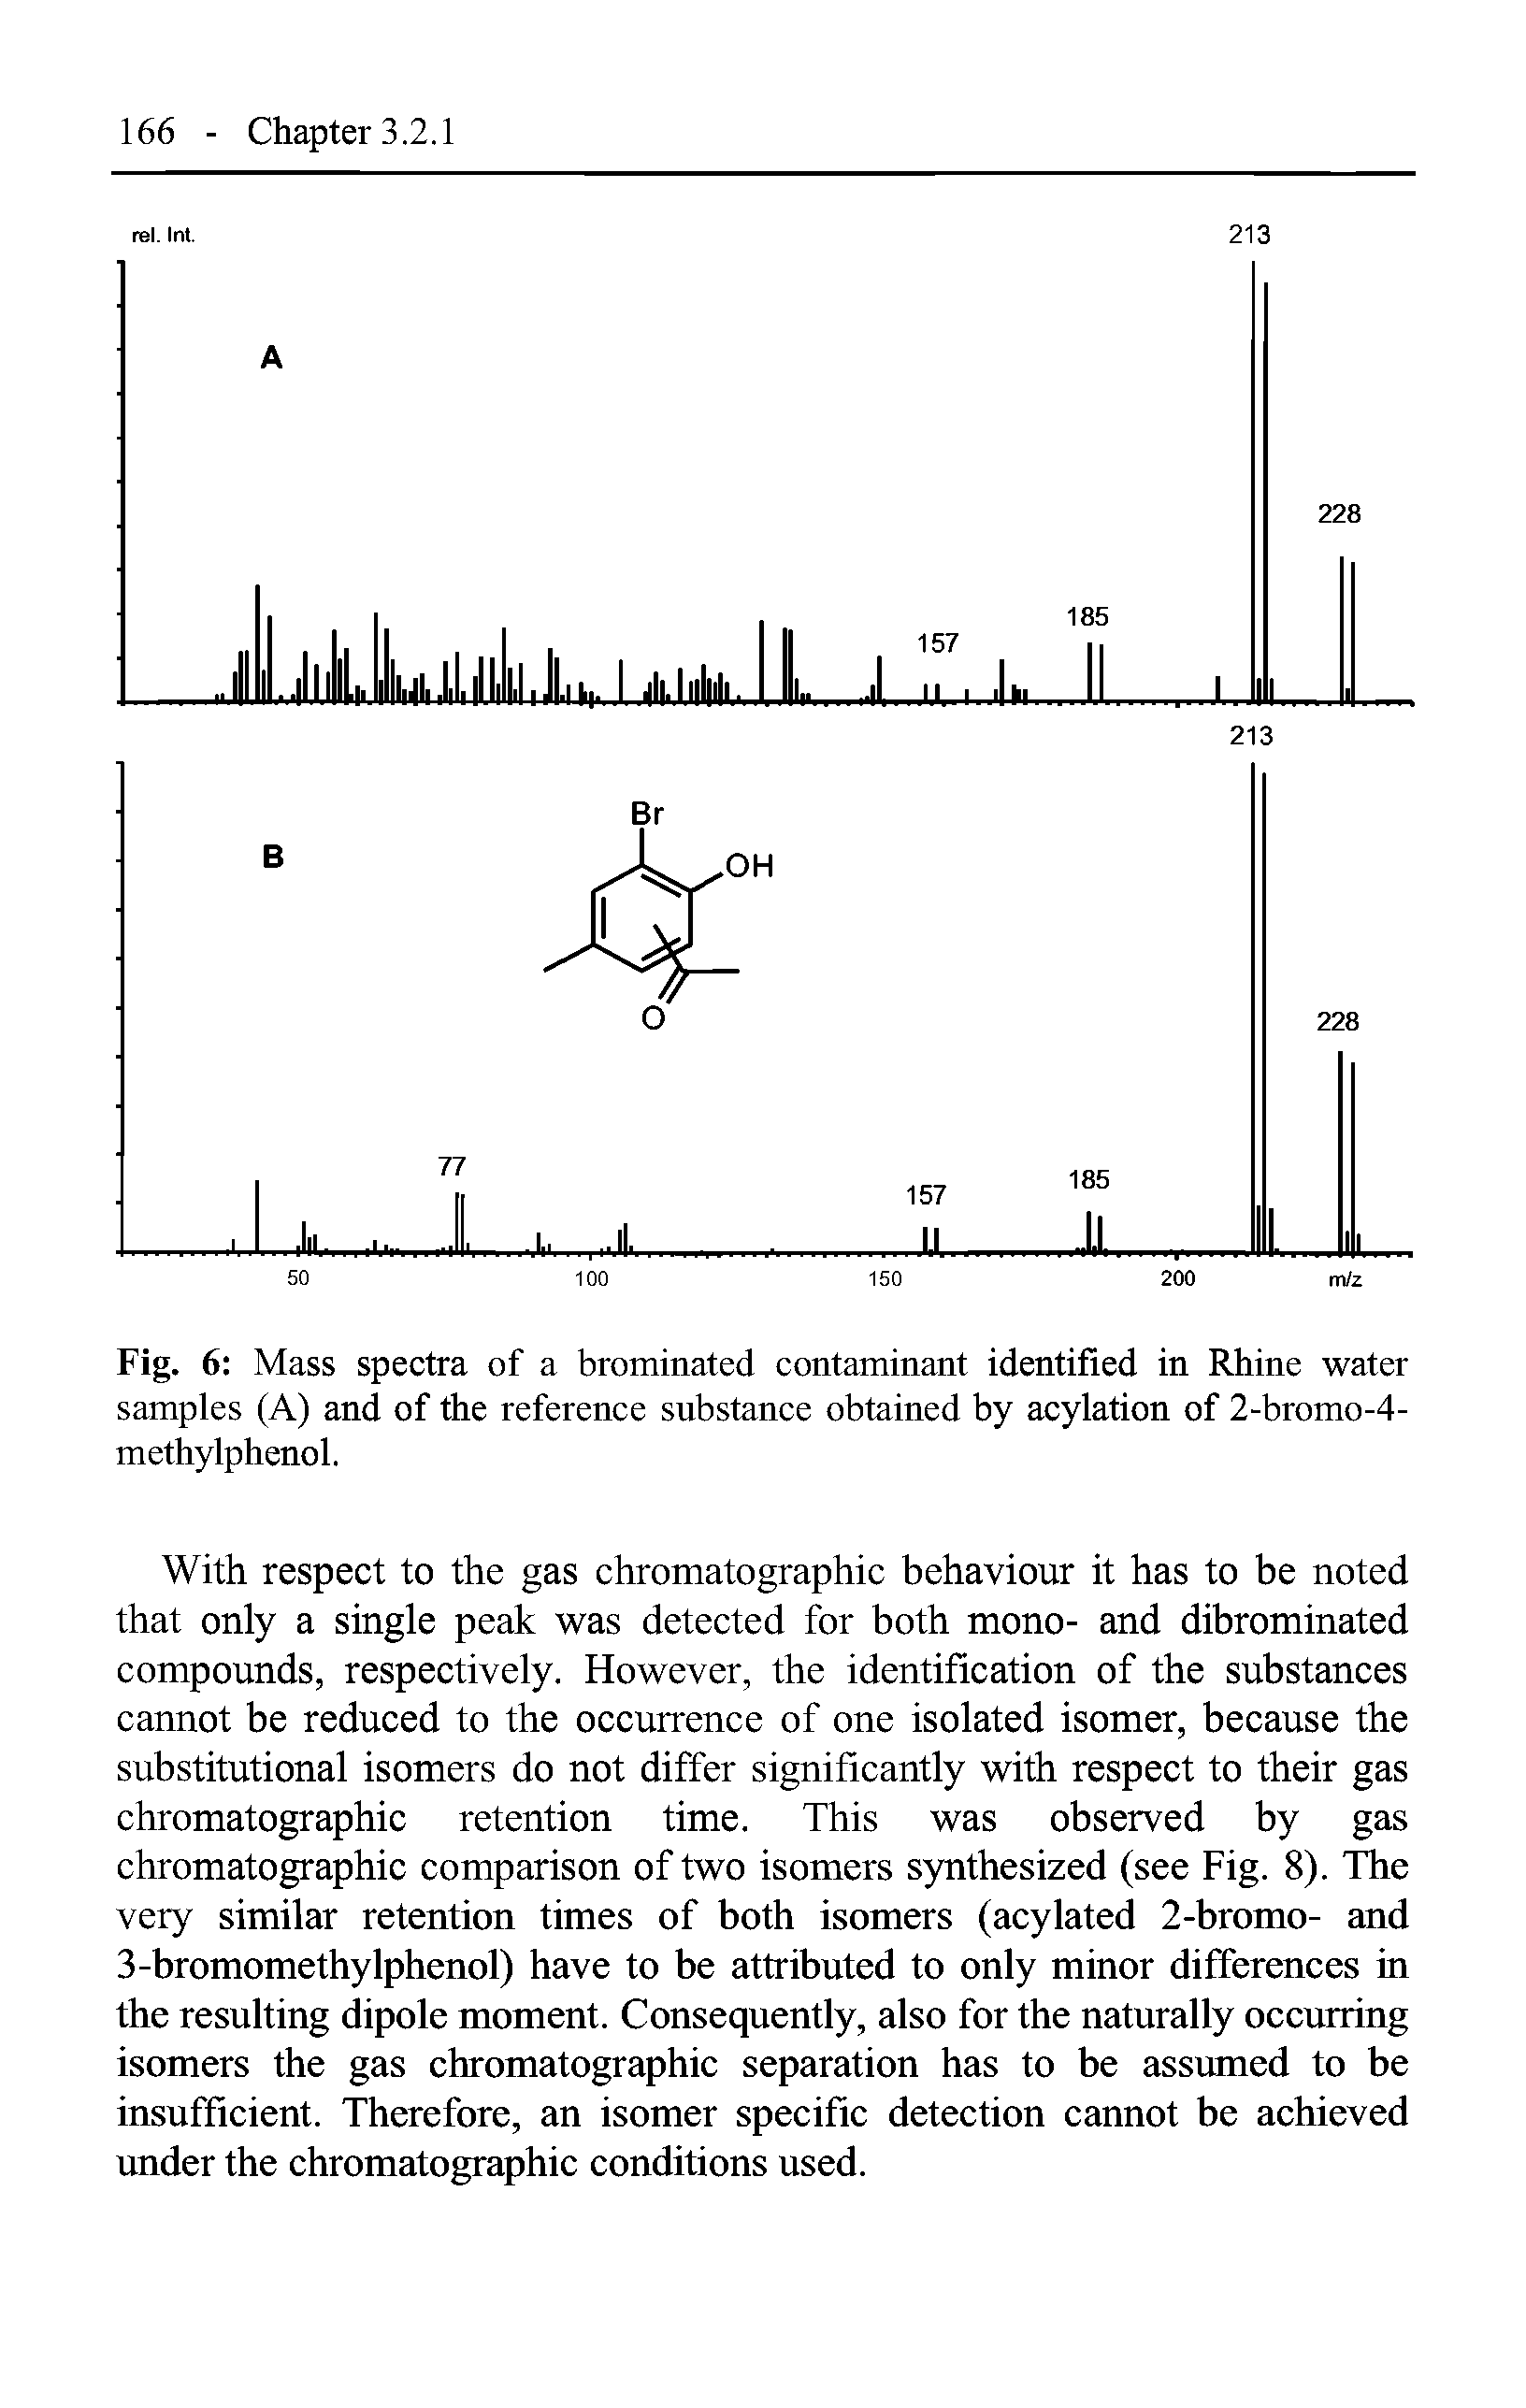 Fig. 6 Mass spectra of a brominated contaminant identified in Rhine water samples (A) and of the reference substance obtained by acylation of 2-bromo-4-methylphenol.